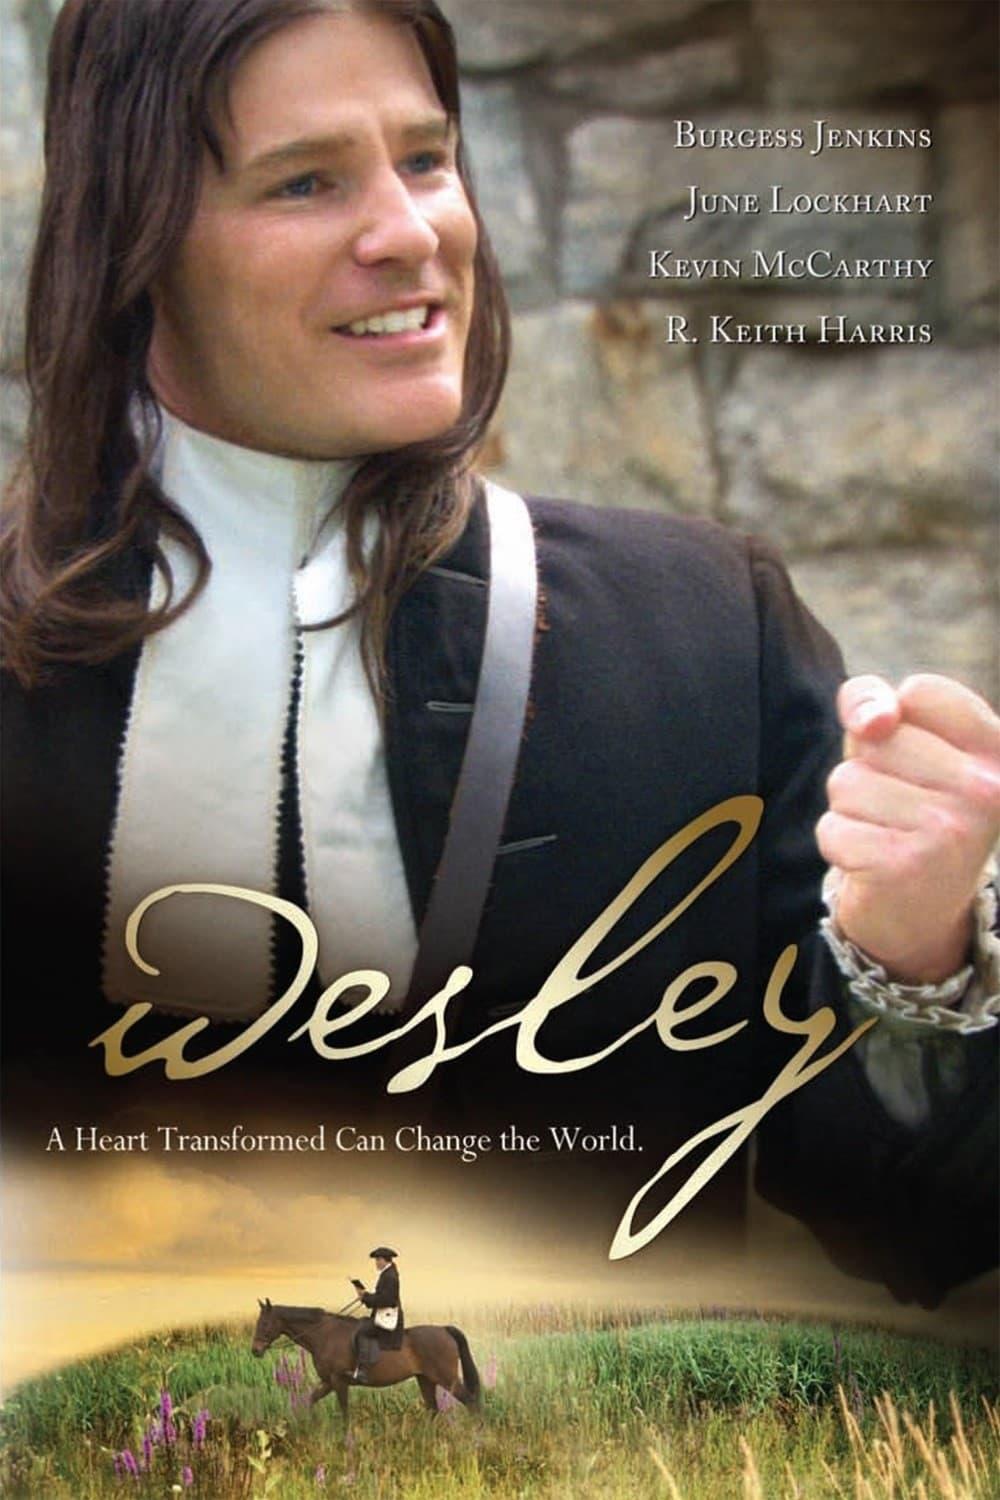 Wesley poster